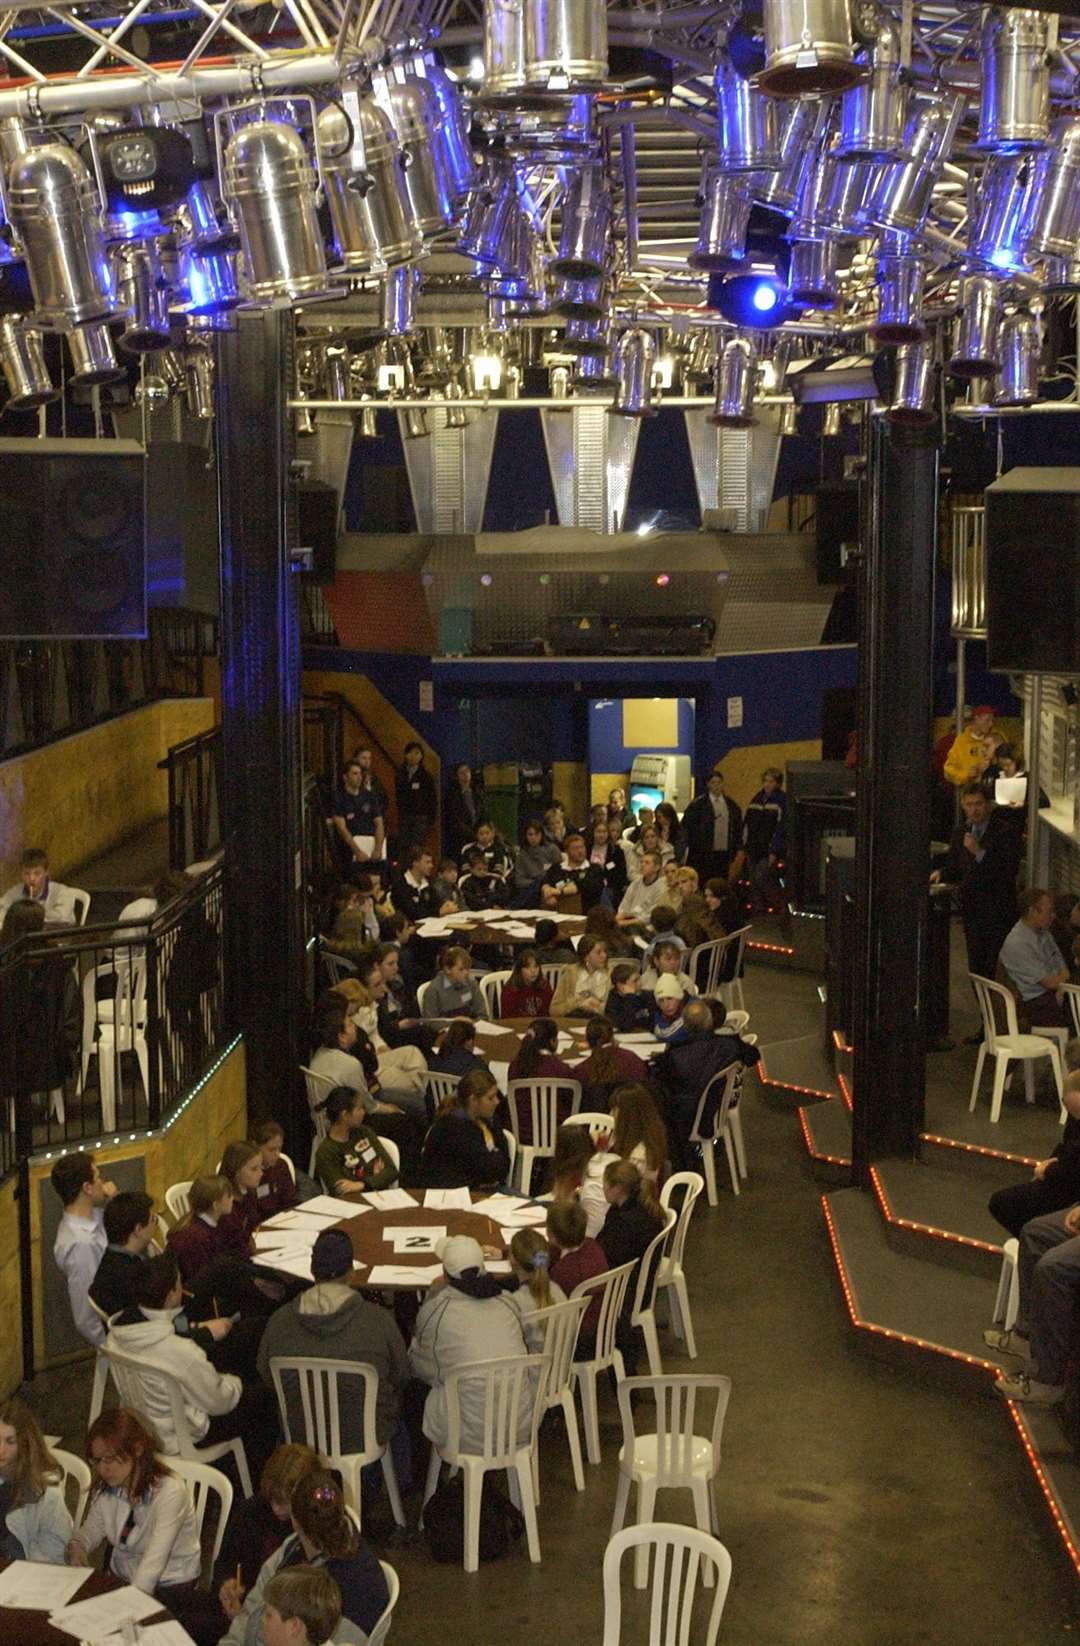 A youth forum taking place on the dance floor of the M20 nightclub in 2002